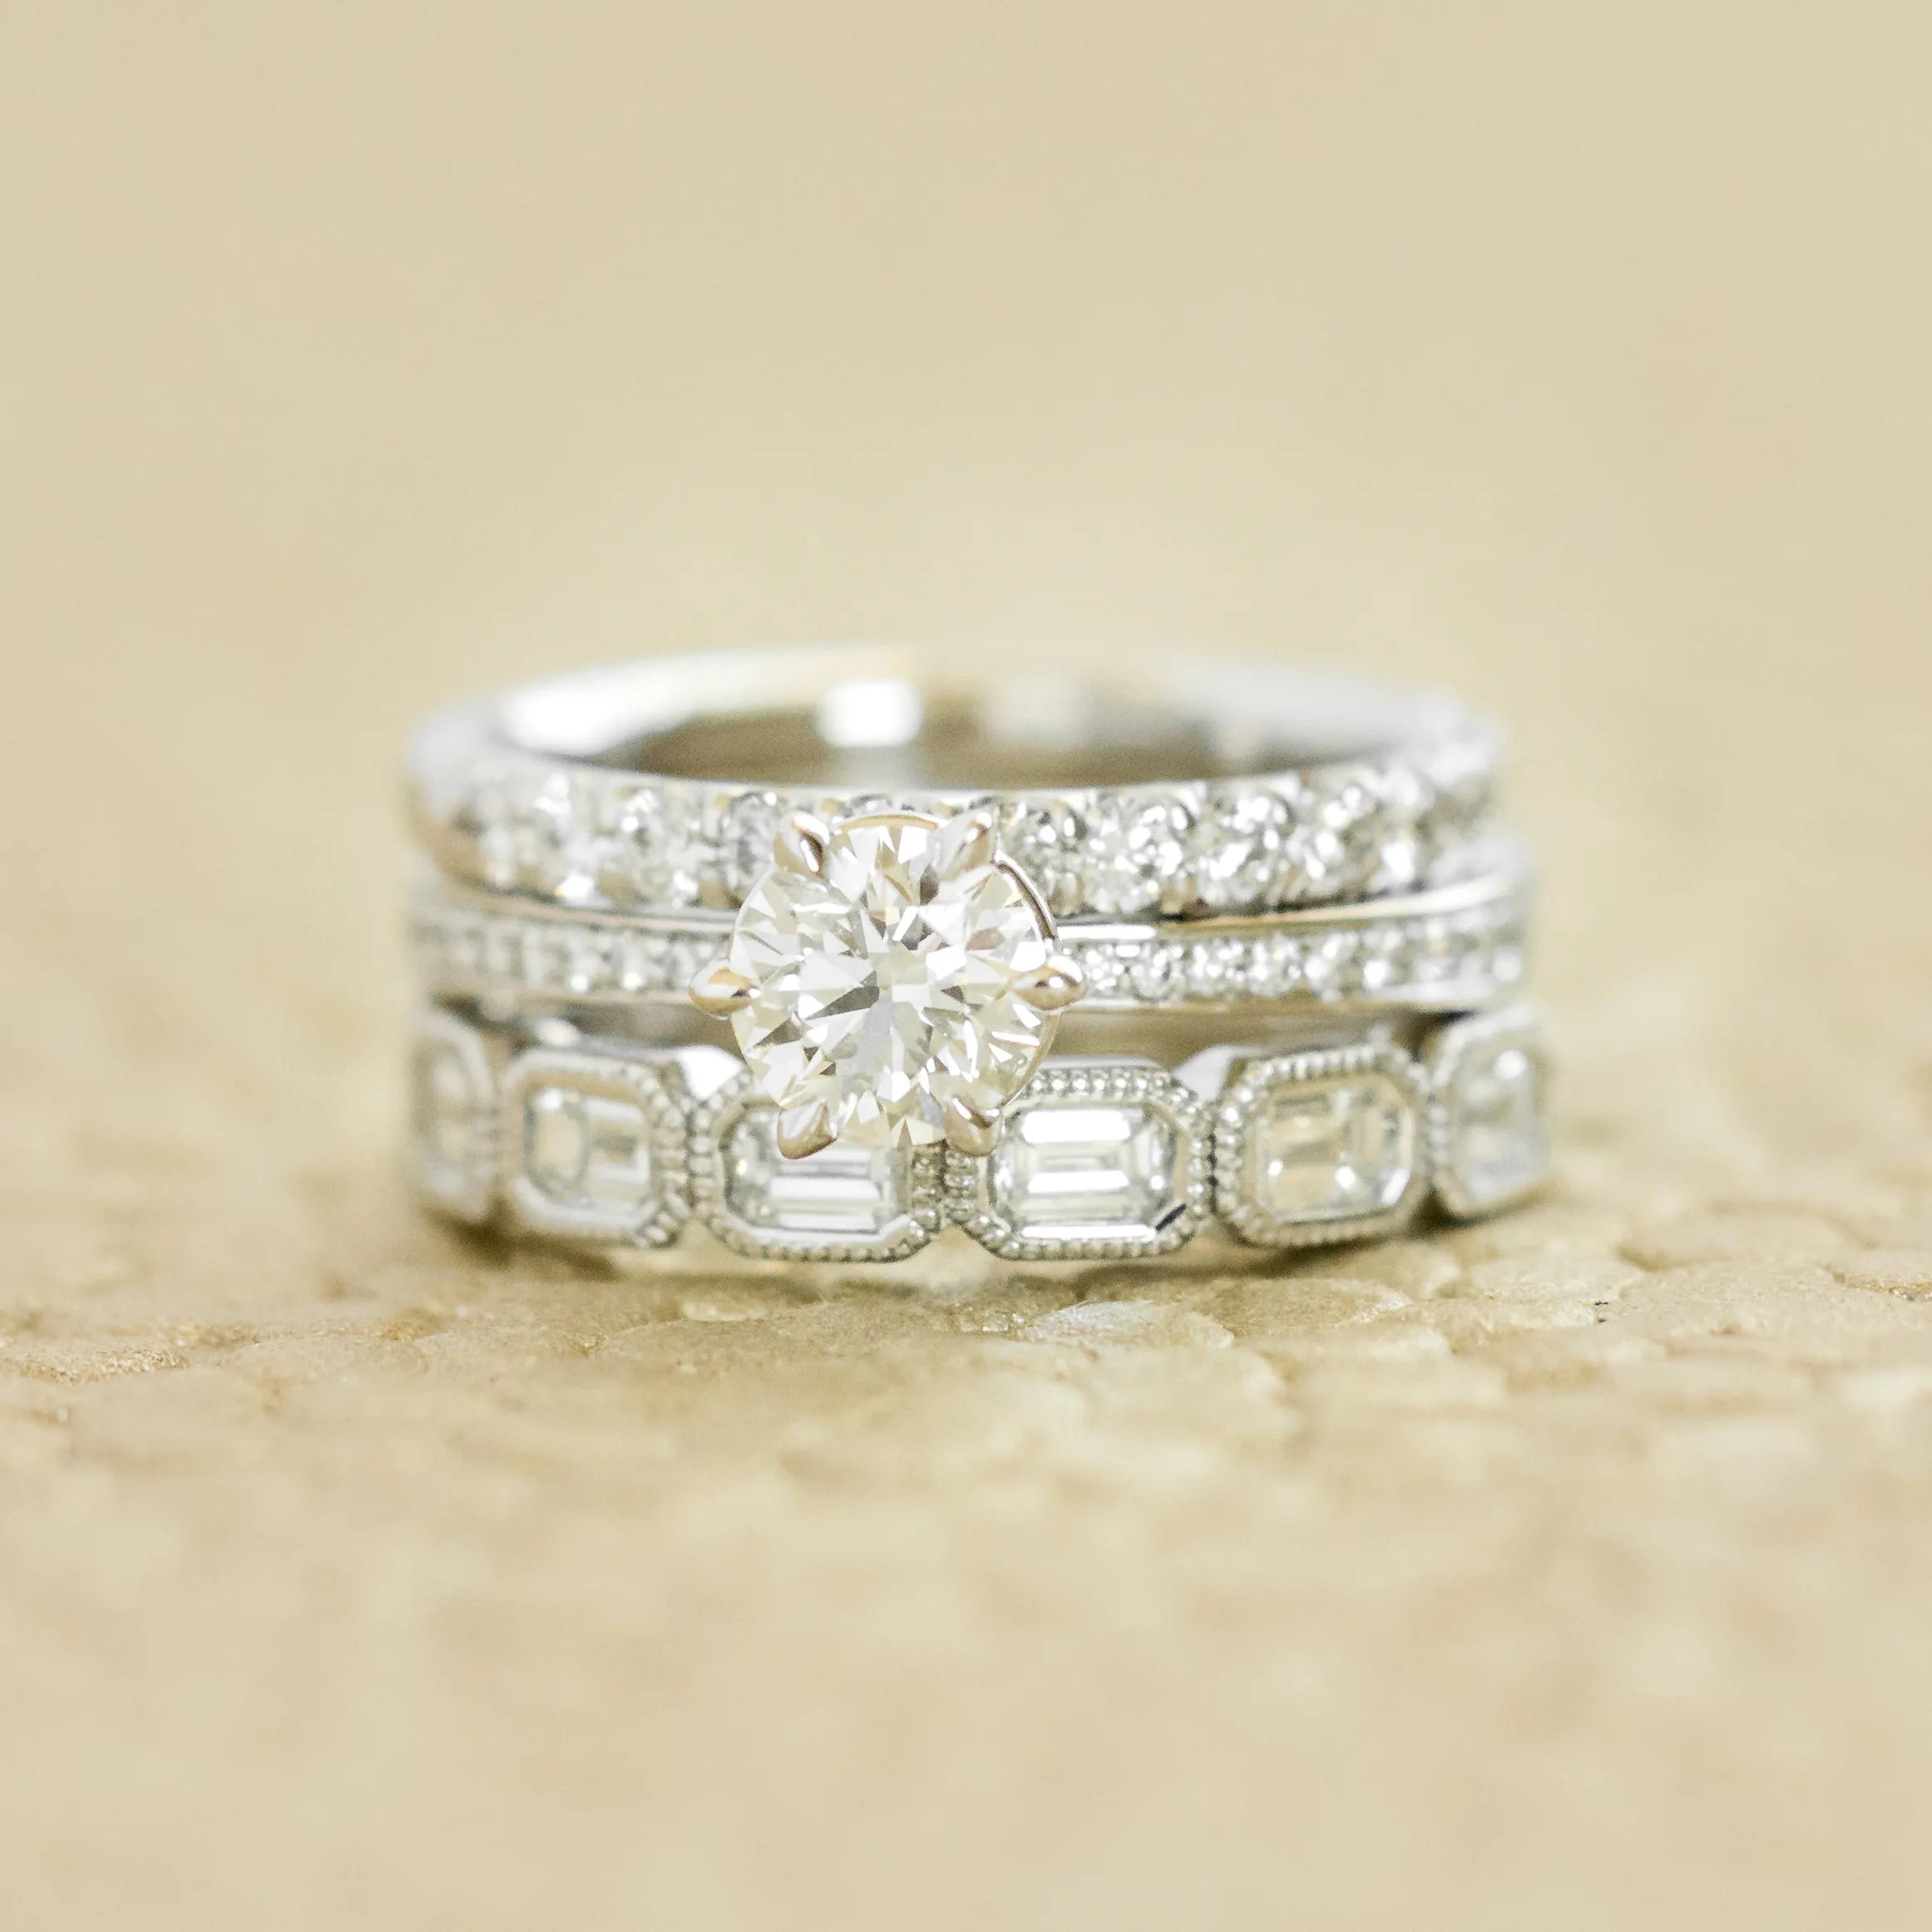 The Ultimate Way to Personalize Your Rings